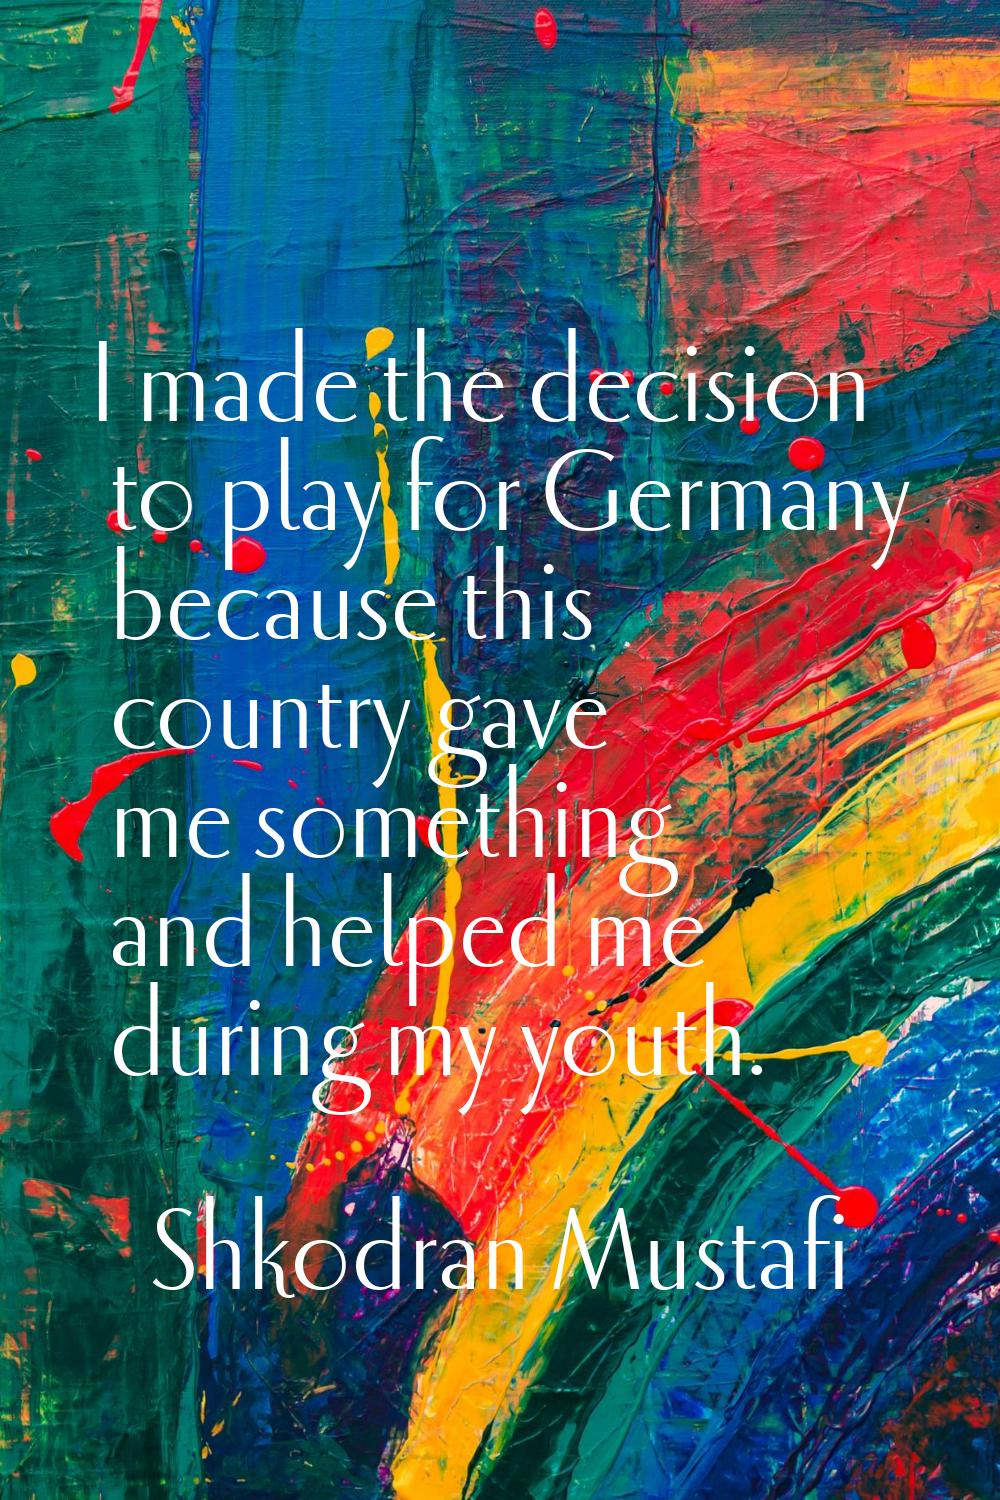 I made the decision to play for Germany because this country gave me something and helped me during